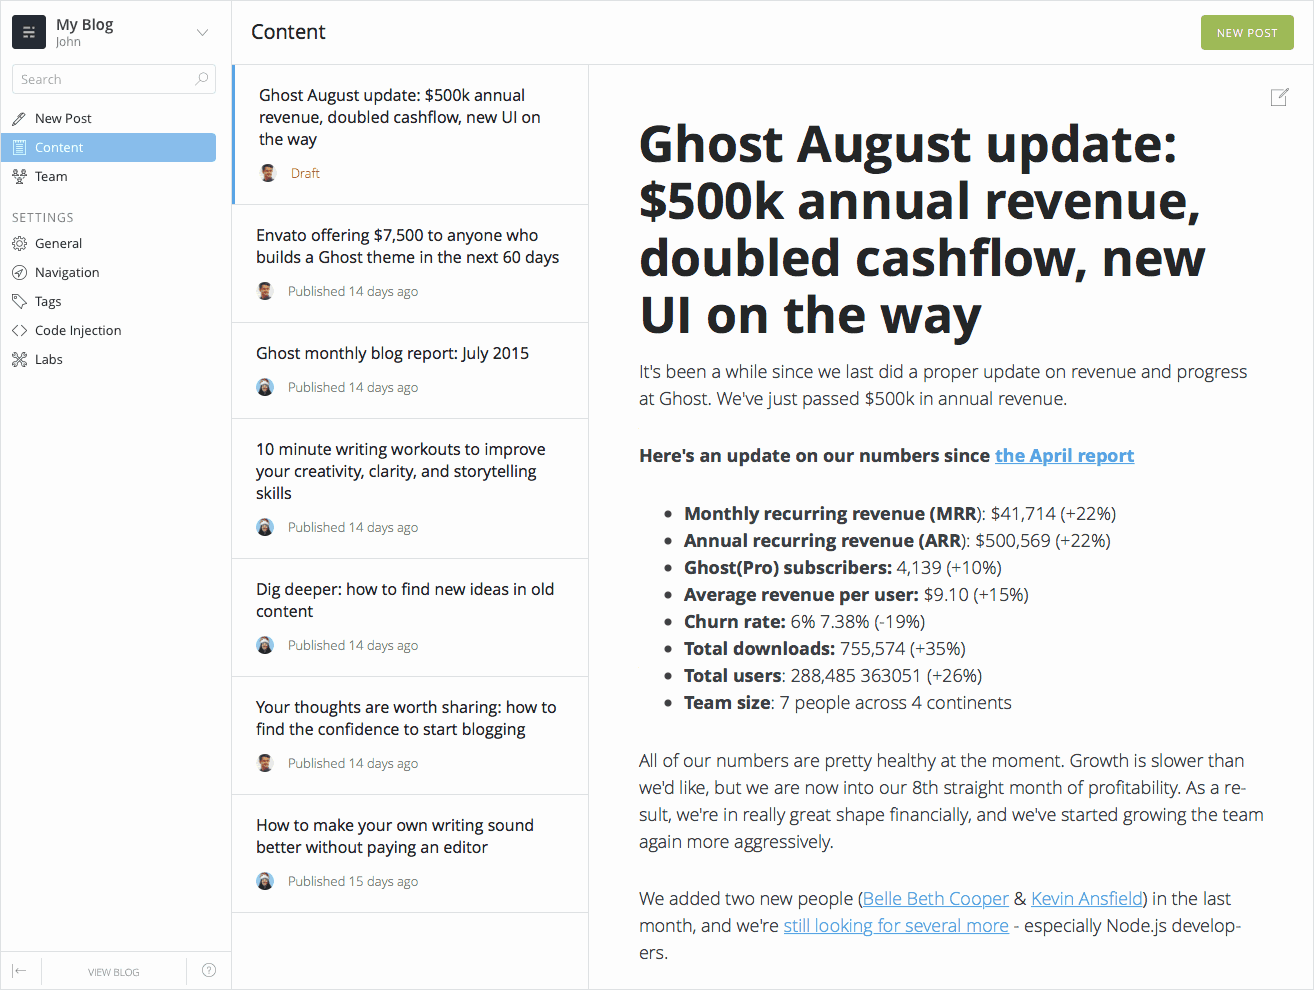 Ghost Improves Interface with New Look and Functionality